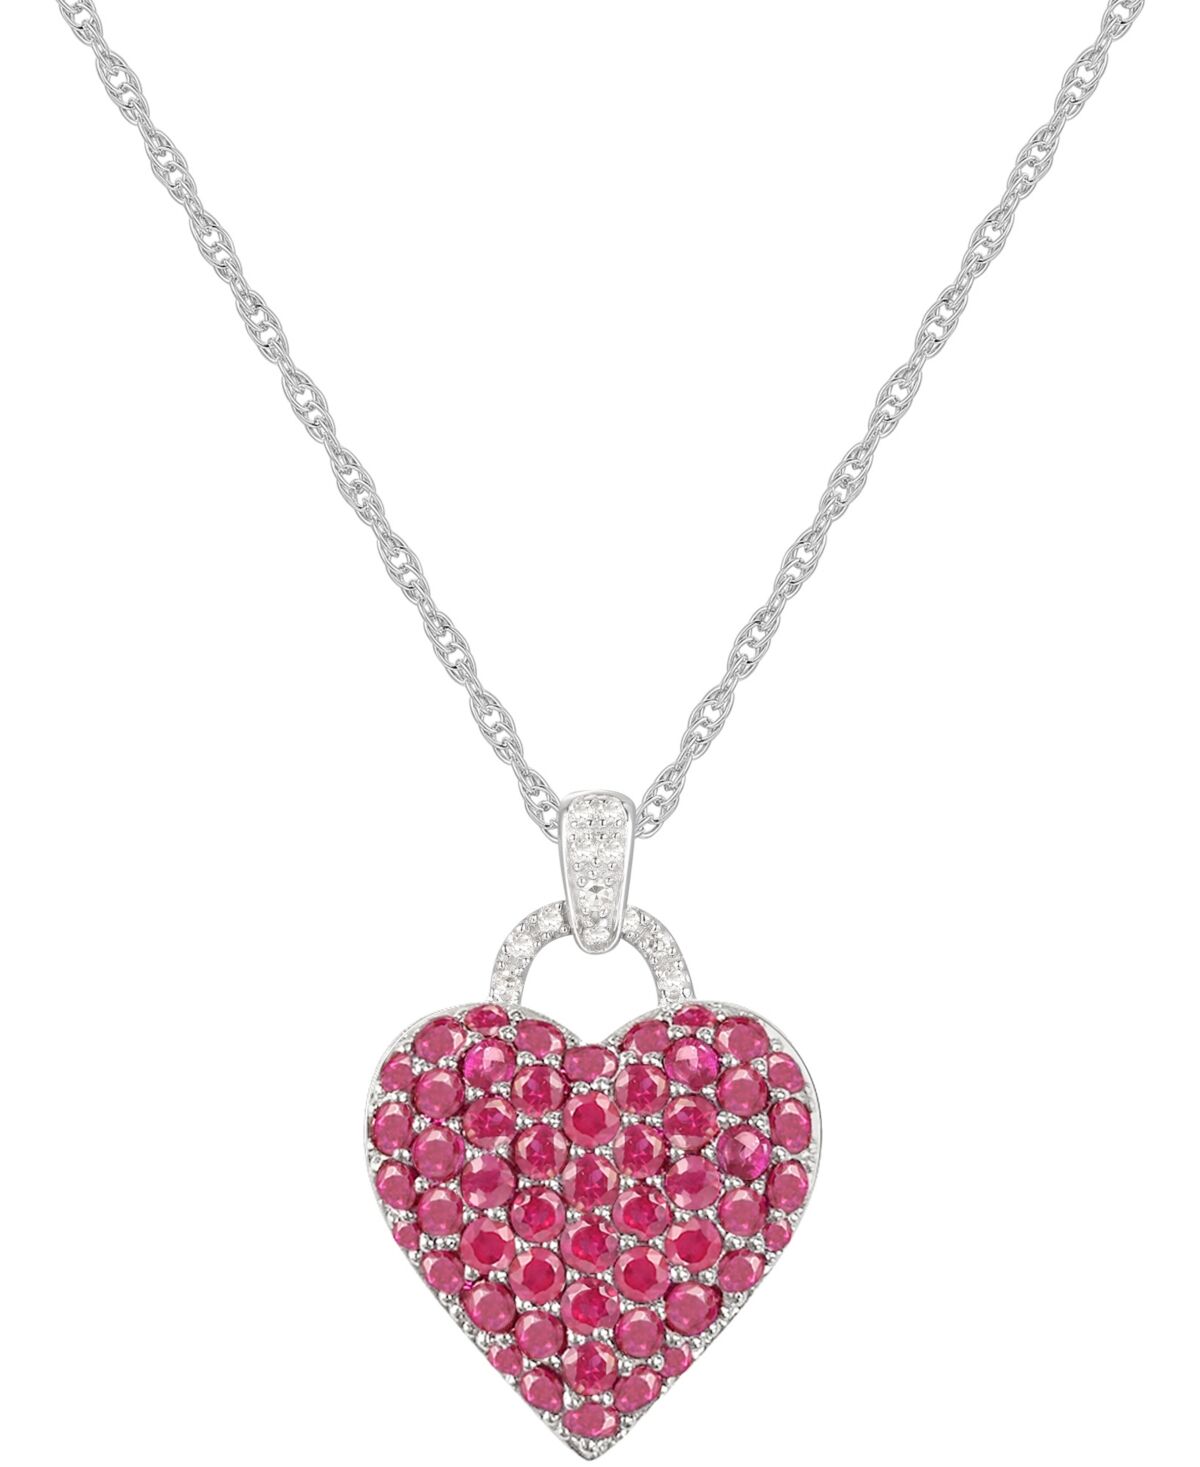 Macy's Sapphire (1-3/4 ct. t.w.) and Diamond Accent Heart Pendant Necklace in Sterling Silver (Also Available in Ruby and Pink Sapphire) - Ruby